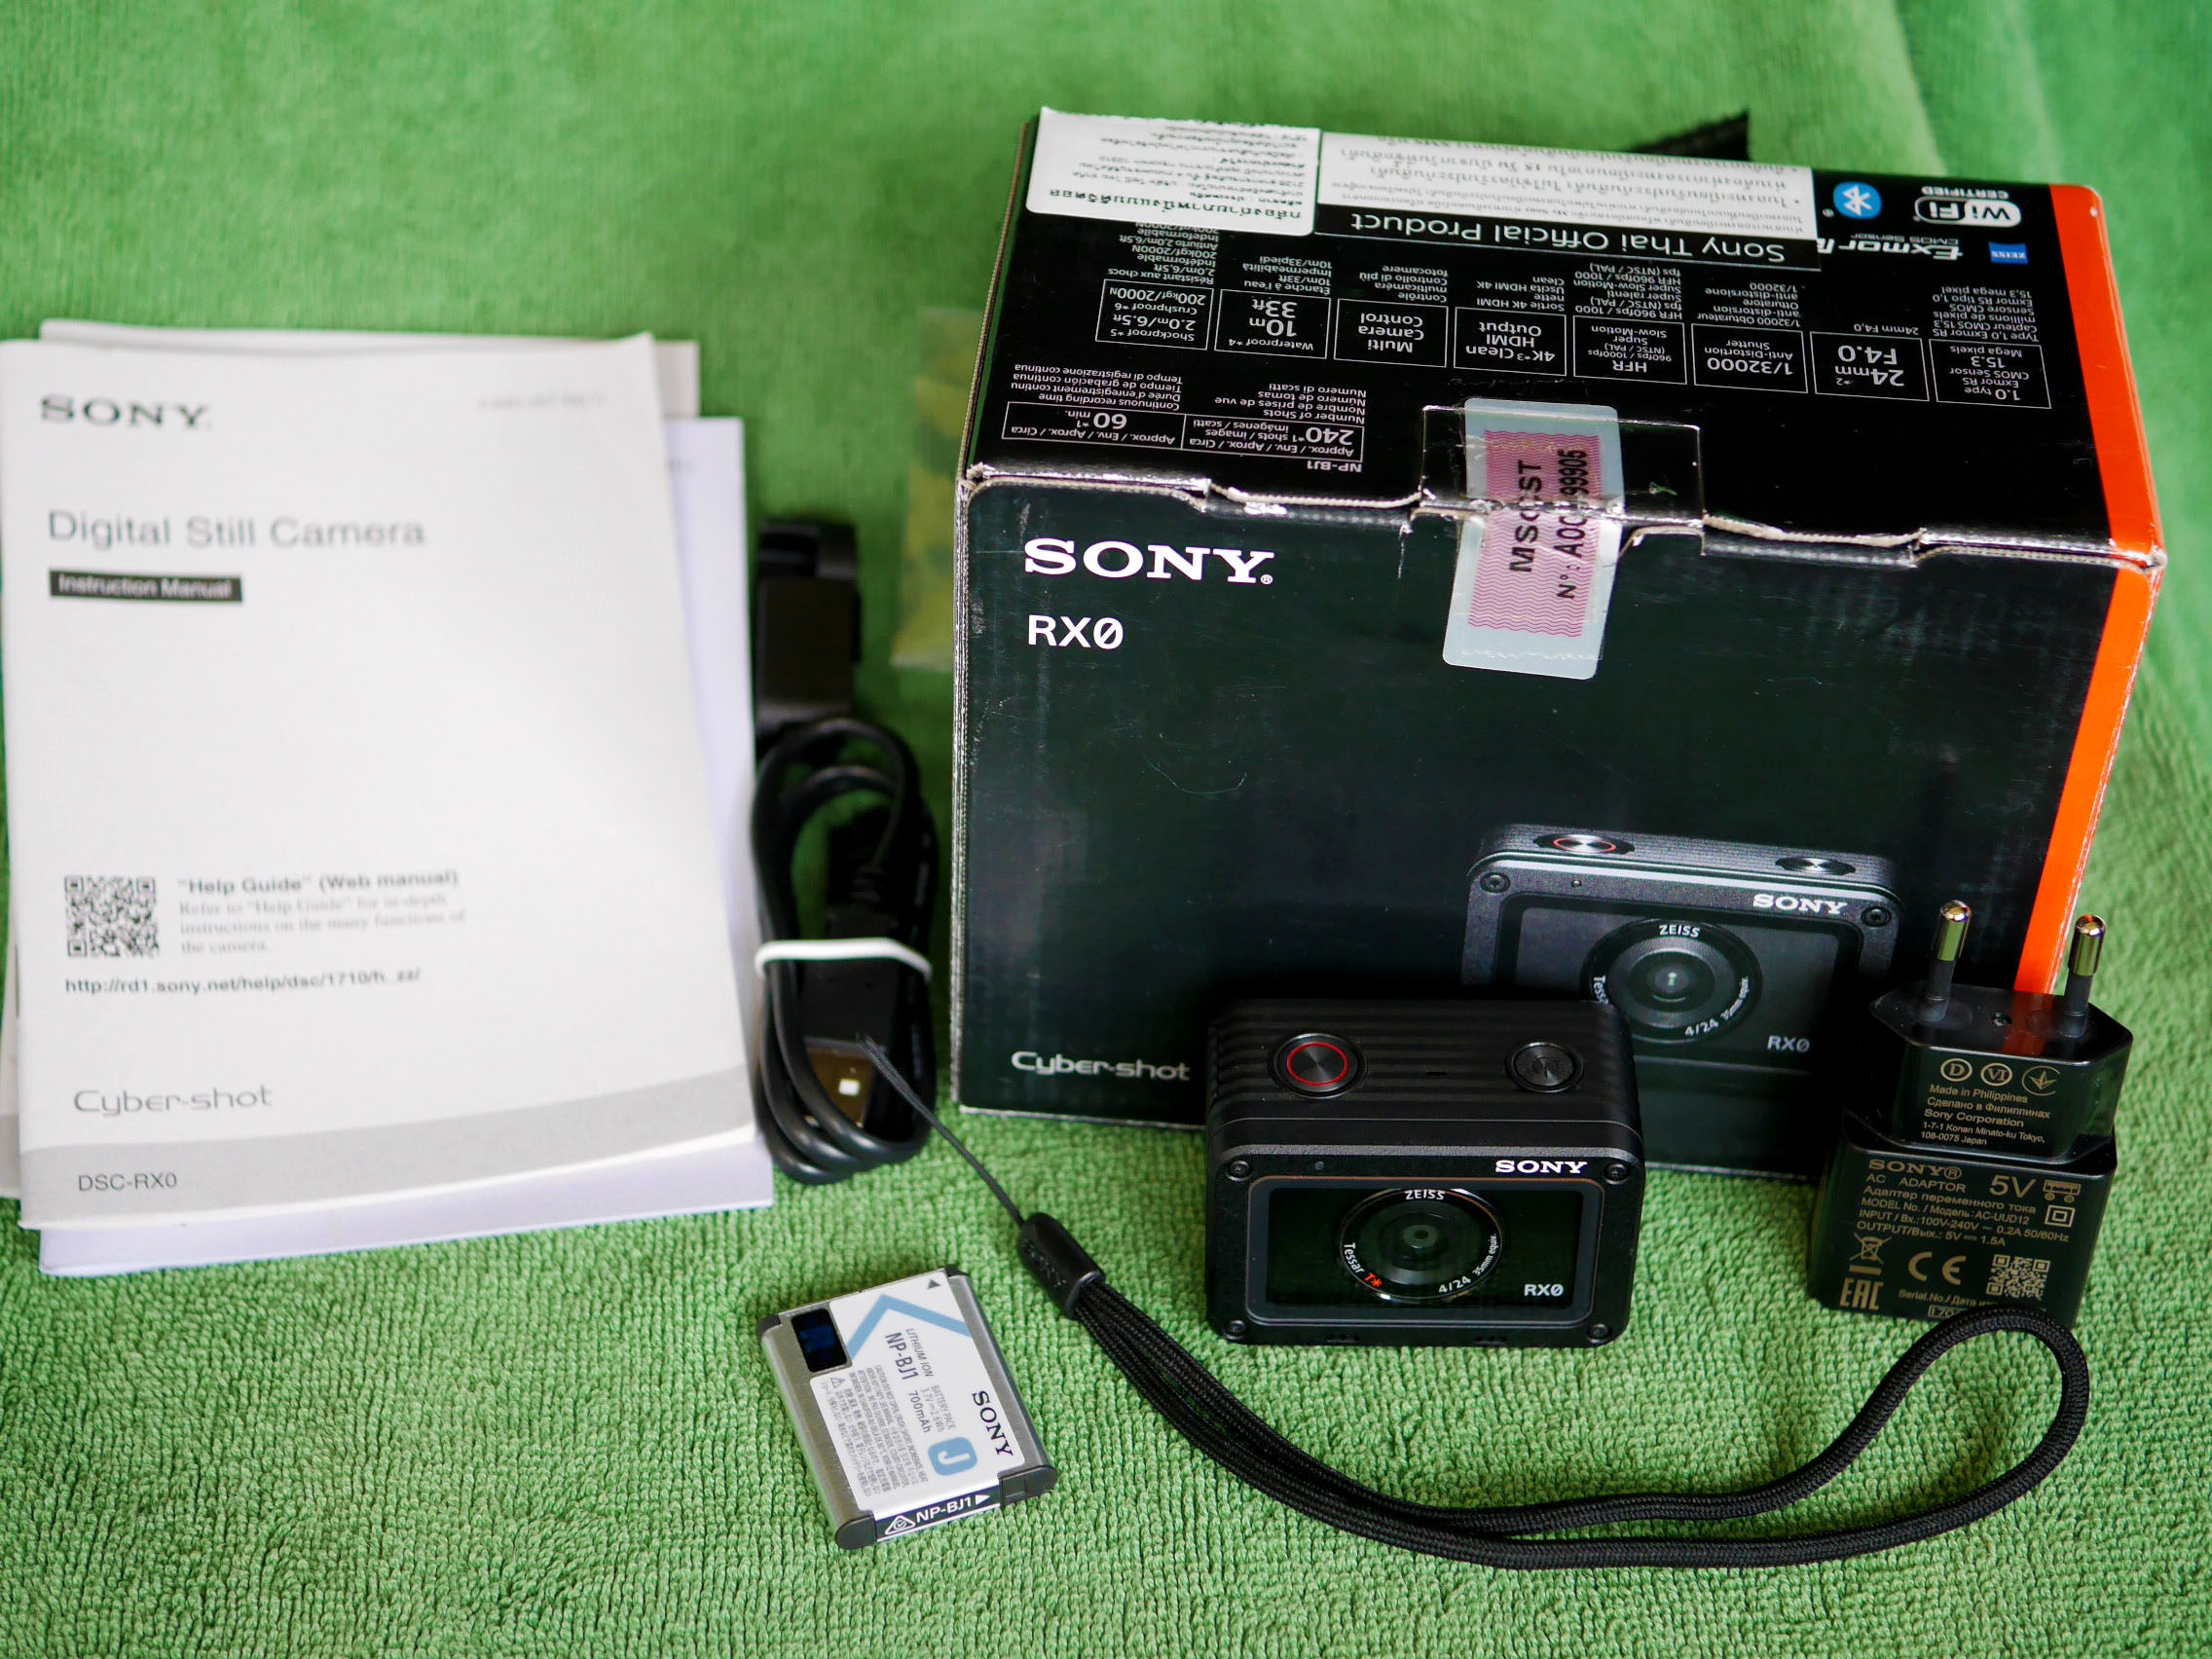 Sony RX0 Cybershot DSC-RX0 Ultra-compact Waterproof Shockproof Camera in Box with Carl Zeiss Tessar Lens. RX0 Mark 1 RXO